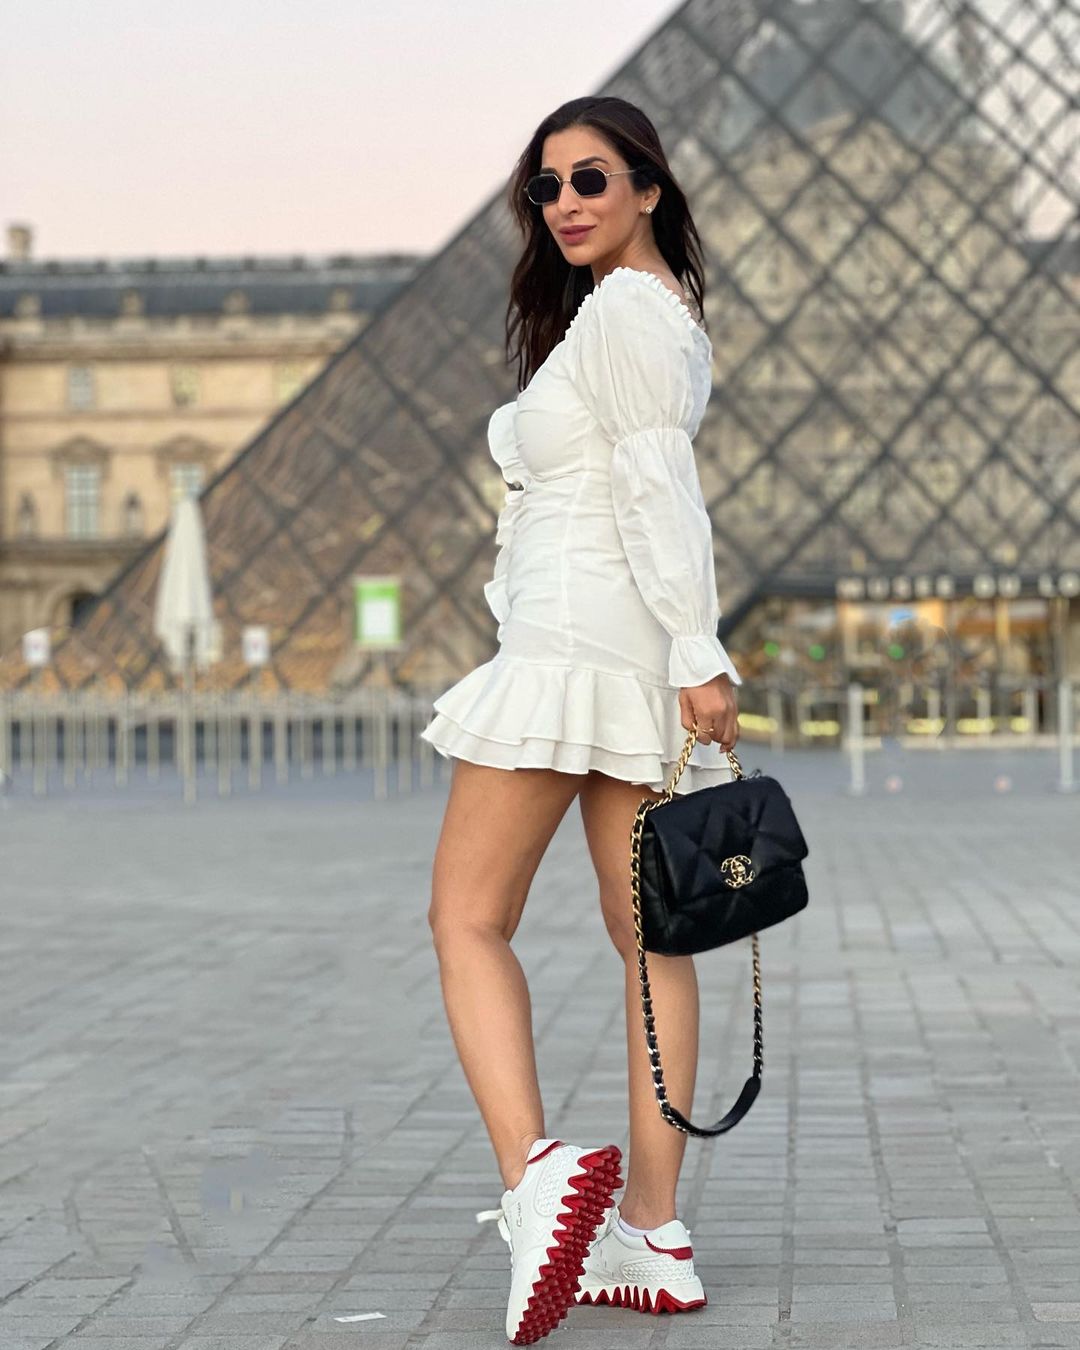 Actor and singer Sophie Choudry recently shared a series of photos from her Paris trip